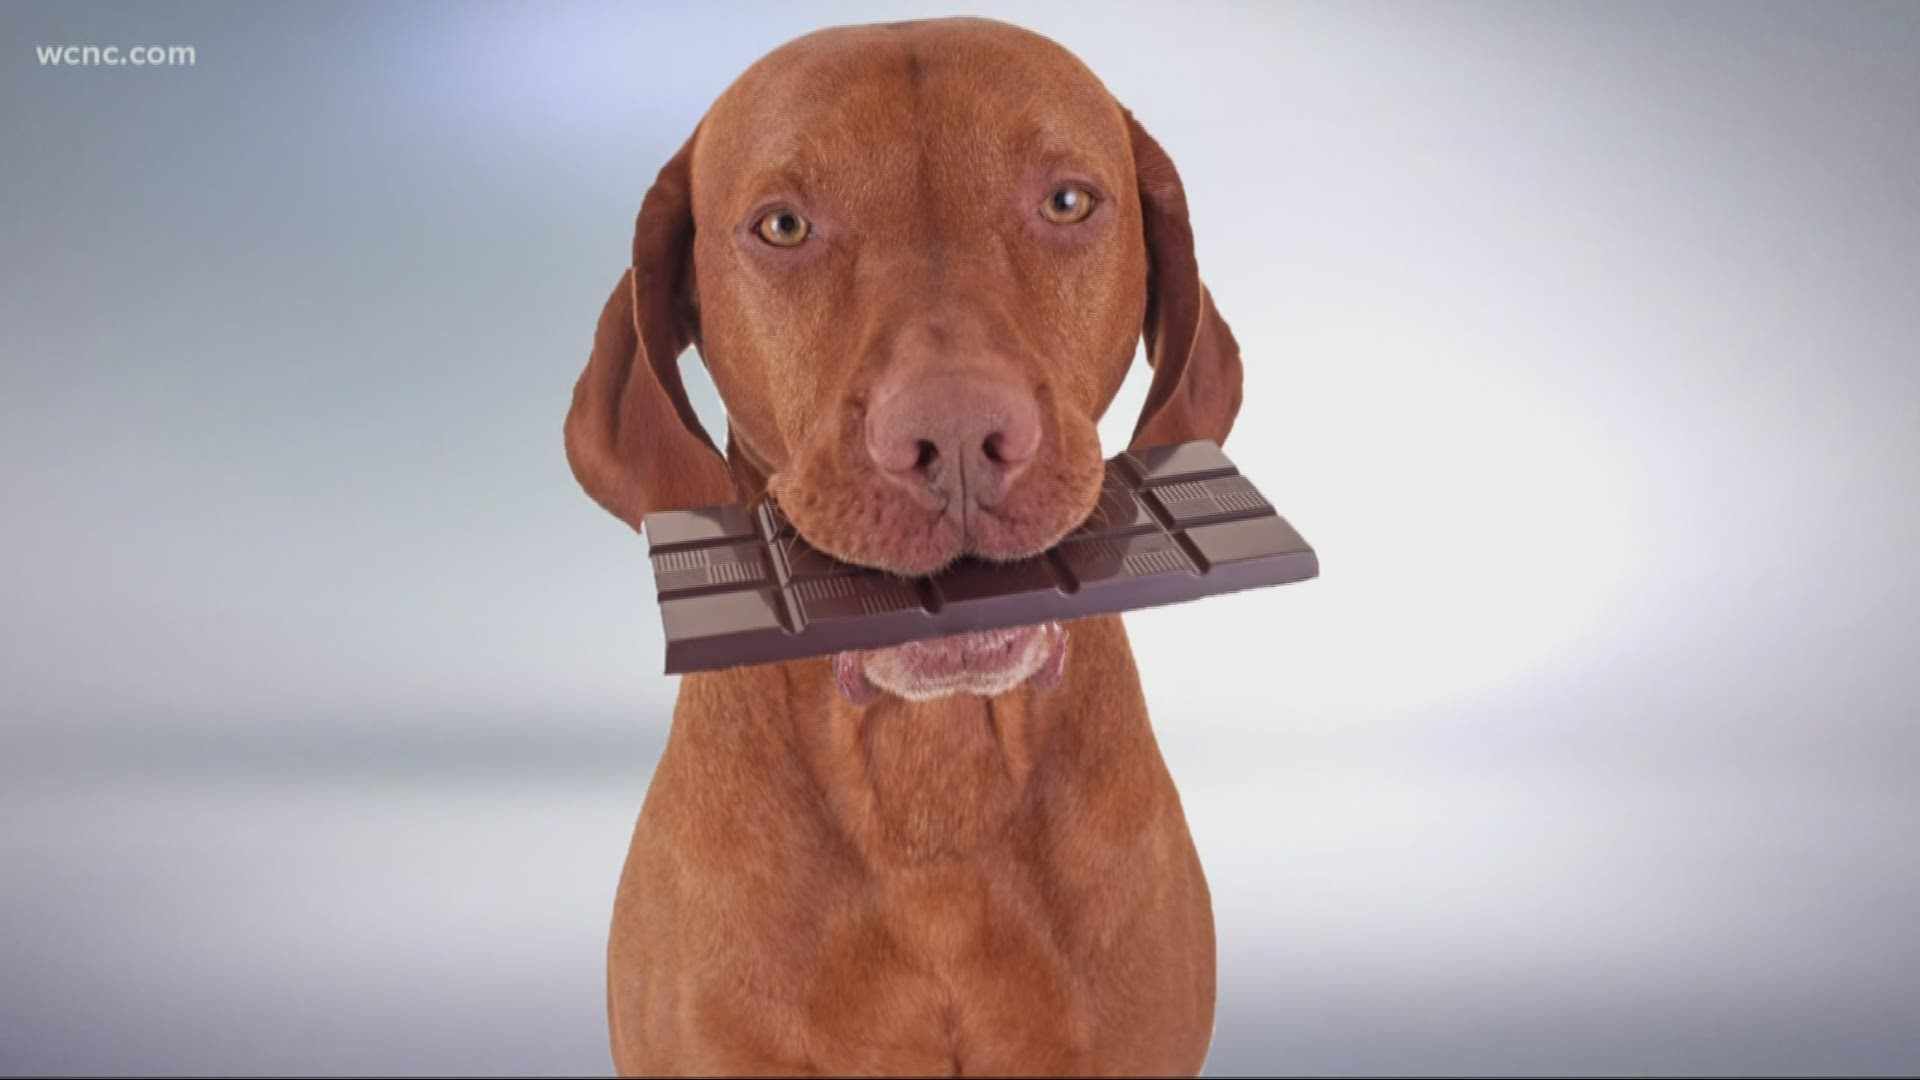 If you've got some chocolate left over from Valentine's Day, you probably know to not let your dog have any. But why are sweets so dangerous for man's best friend?